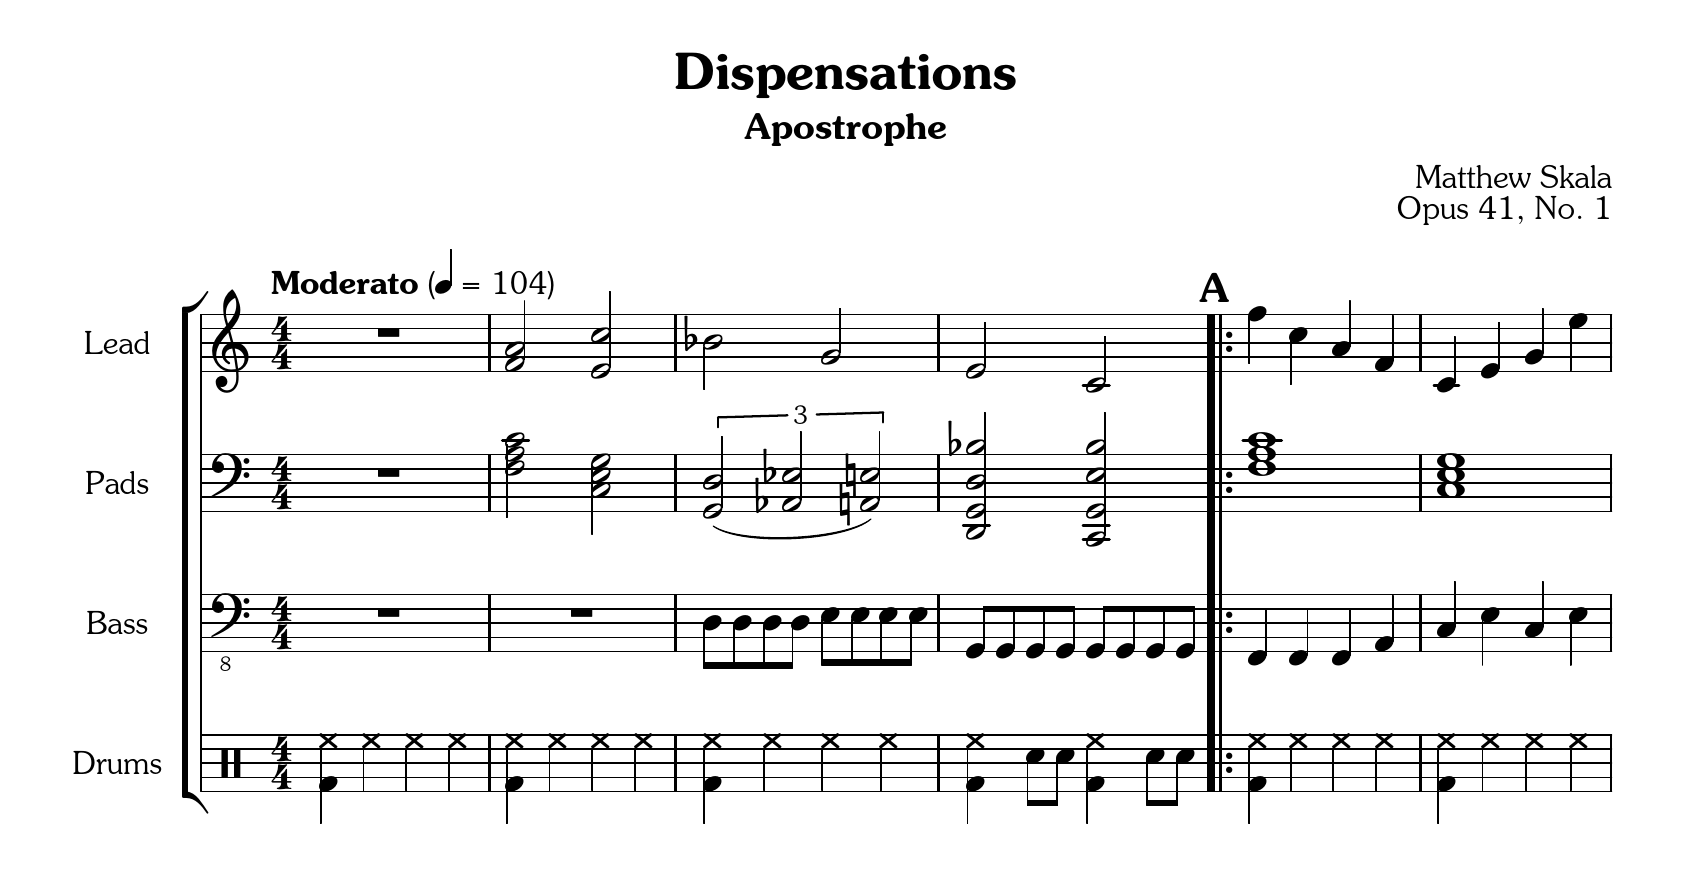 first system of sheet music for
Apostrophe